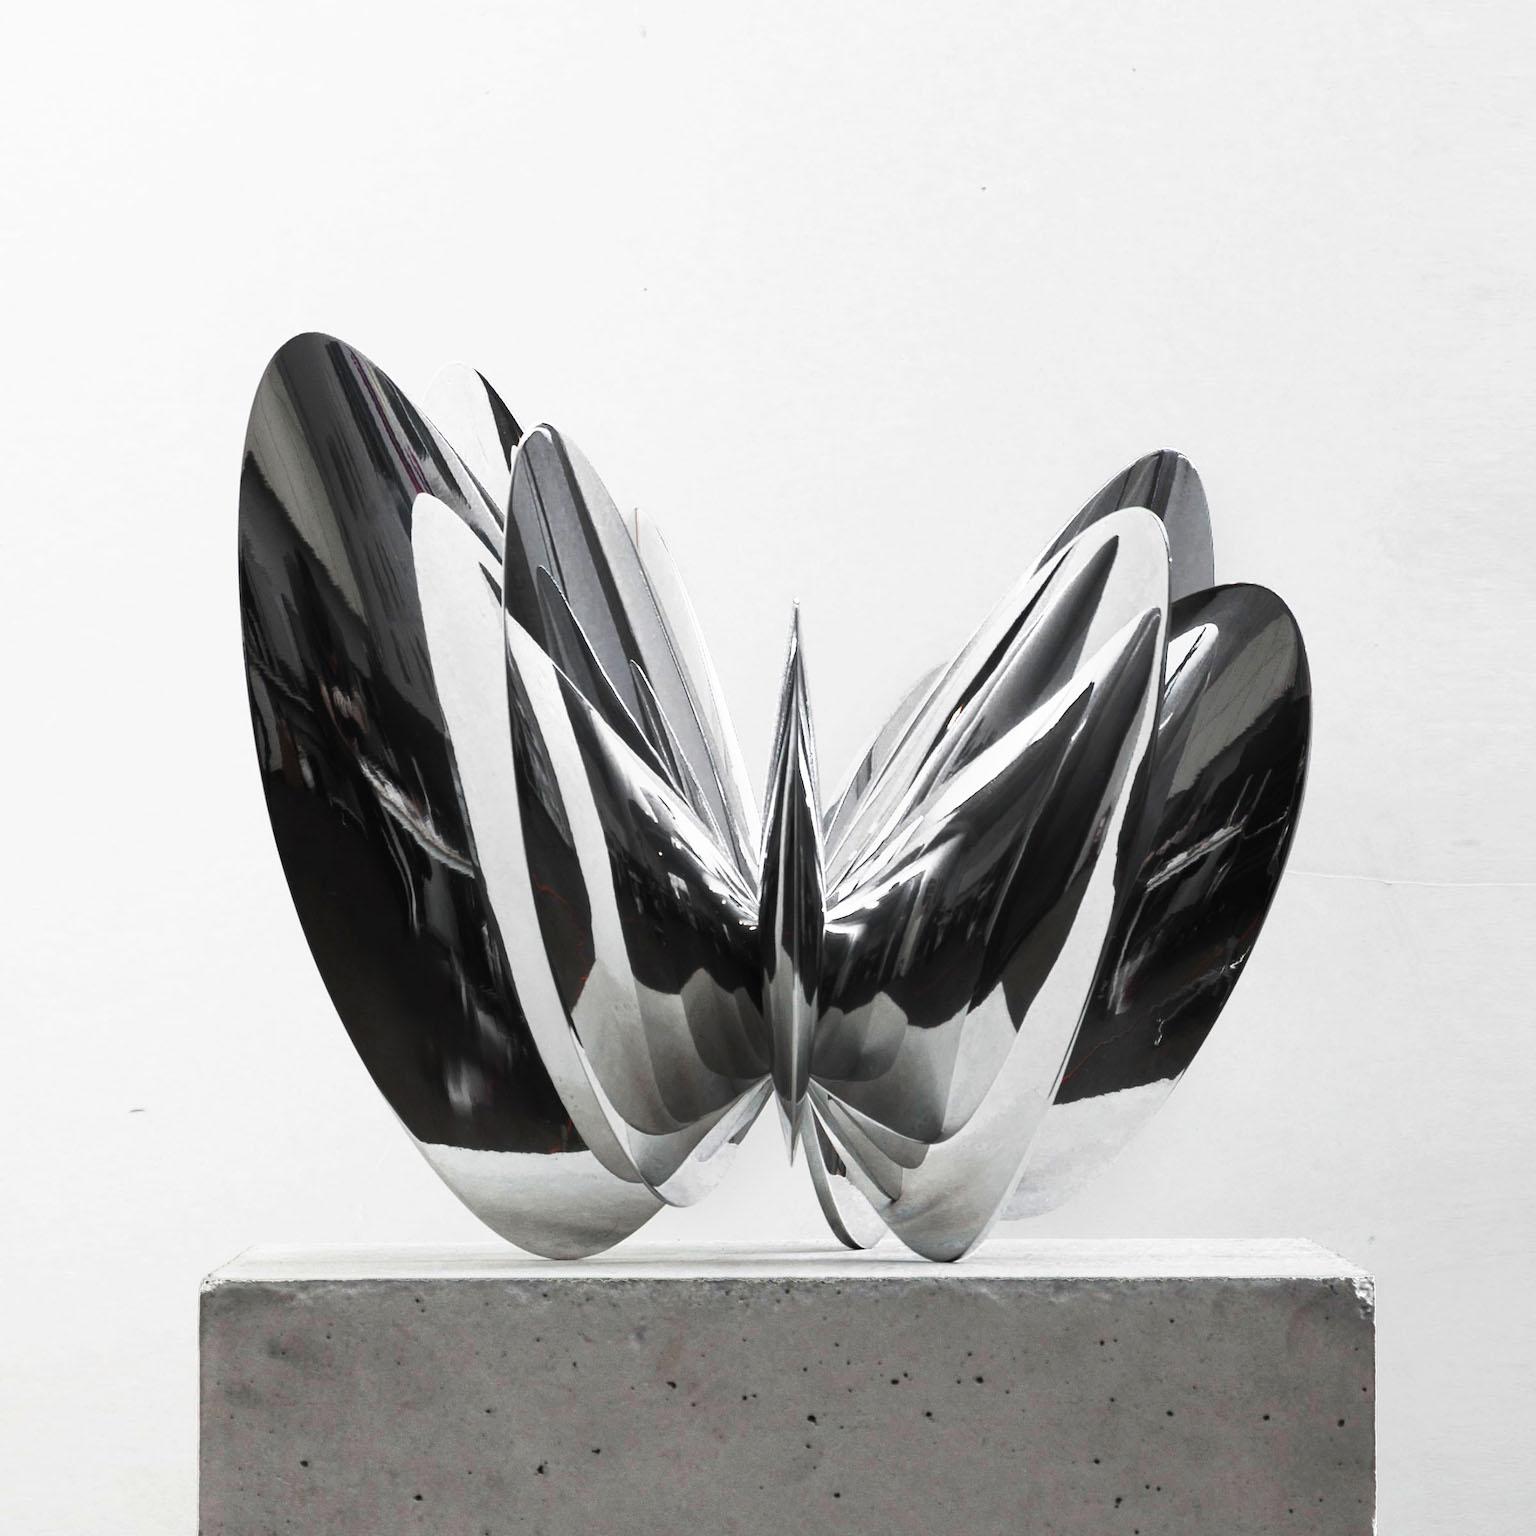 Norman Mooney Abstract Sculpture - "Butterfly Effect No. 2", Organic, Abstract Metal Sculpture, Table-Top Size